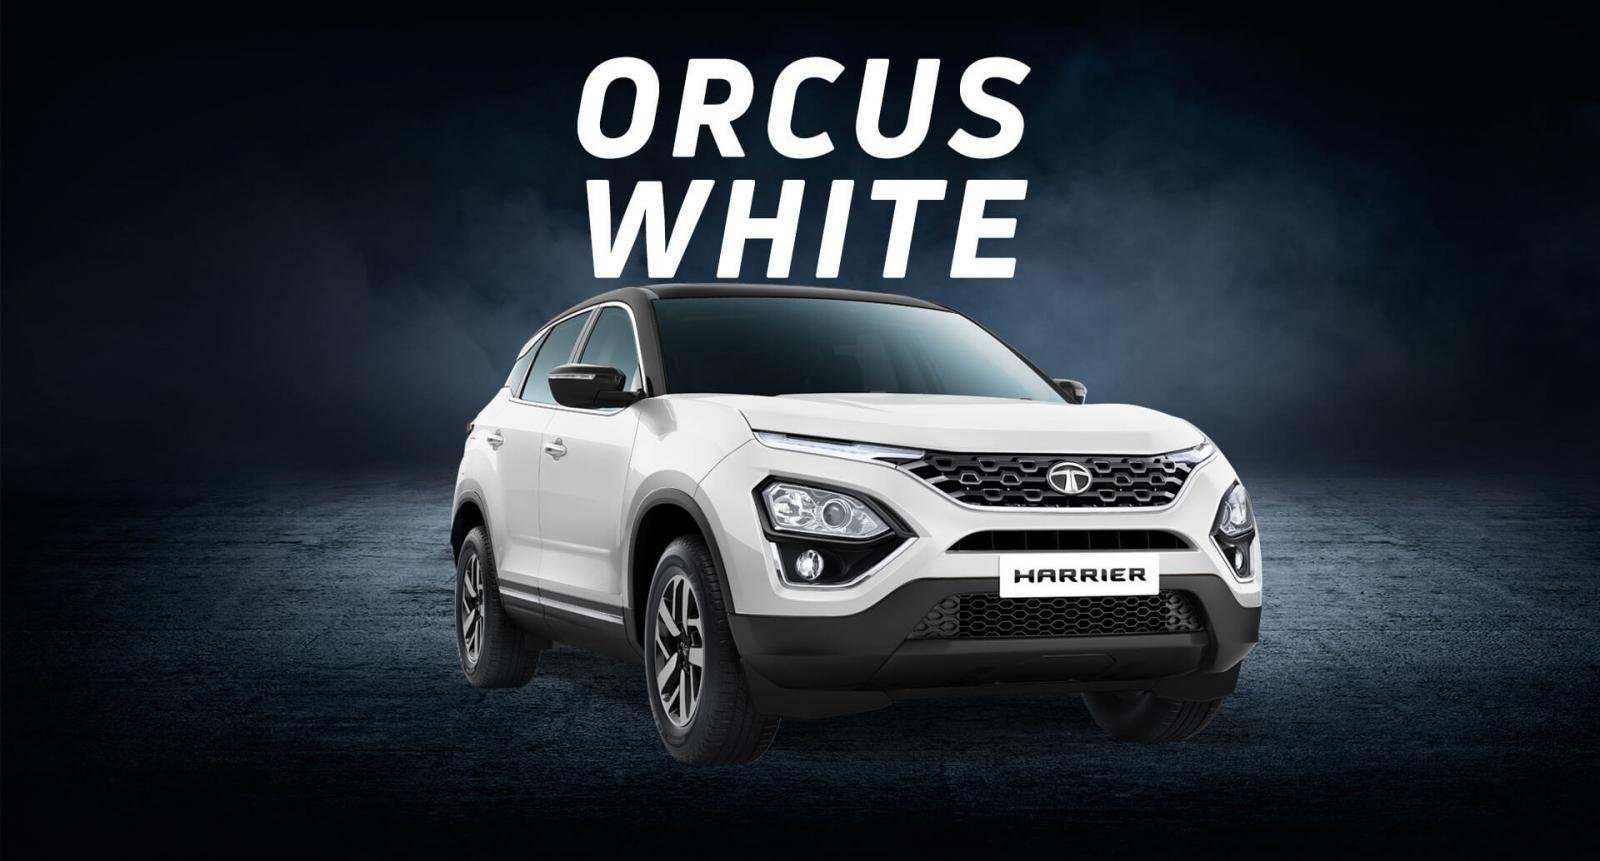 2021 Tata Harrier orcus white